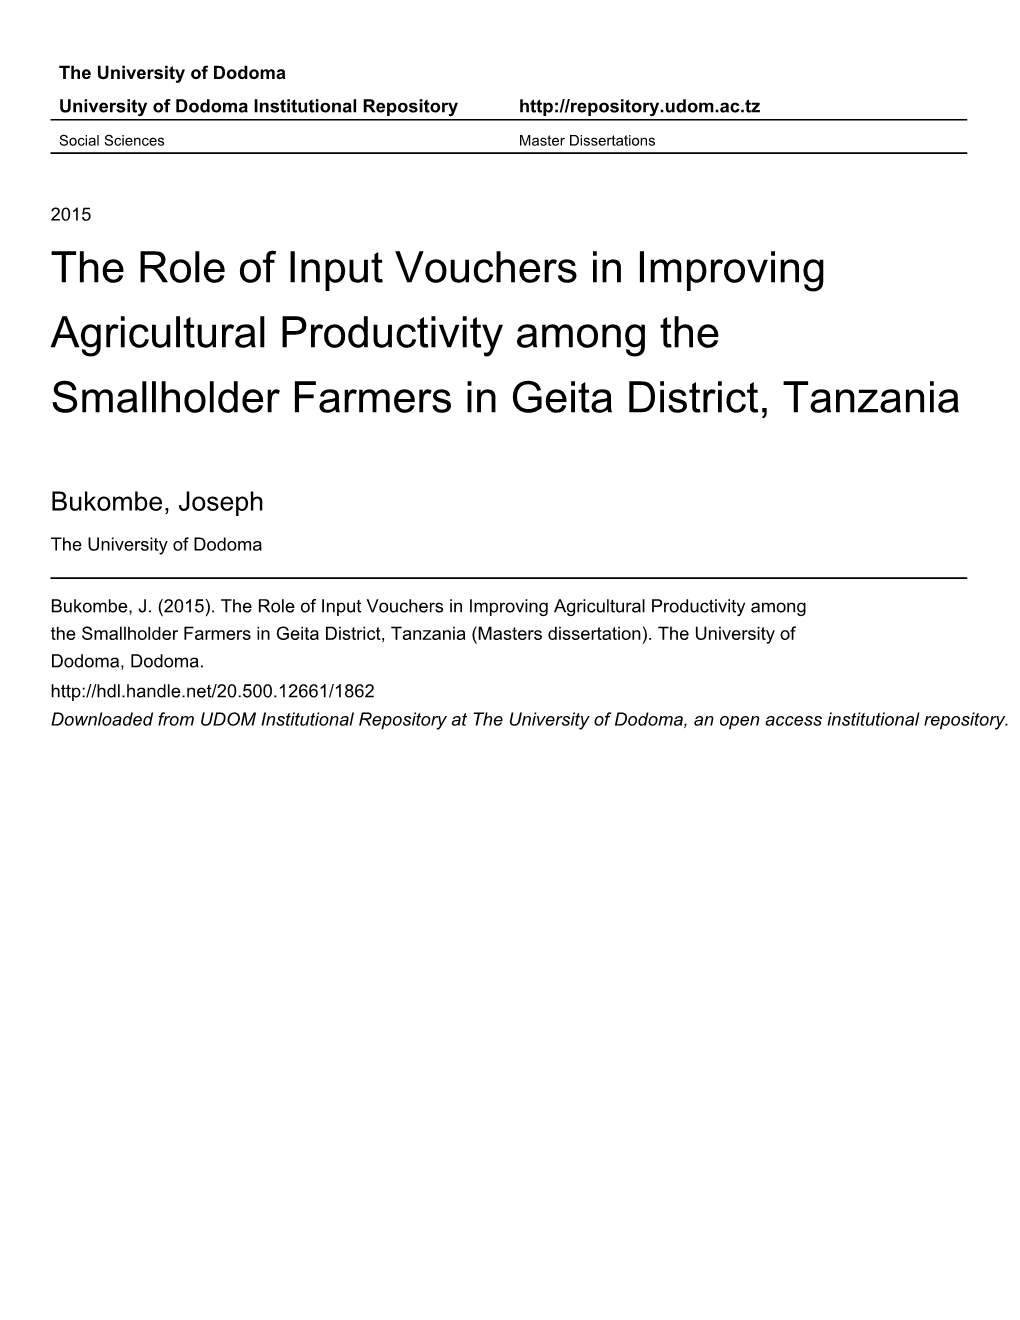 The Role of Input Vouchers in Improving Agricultural Productivity Among the Smallholder Farmers in Geita District, Tanzania